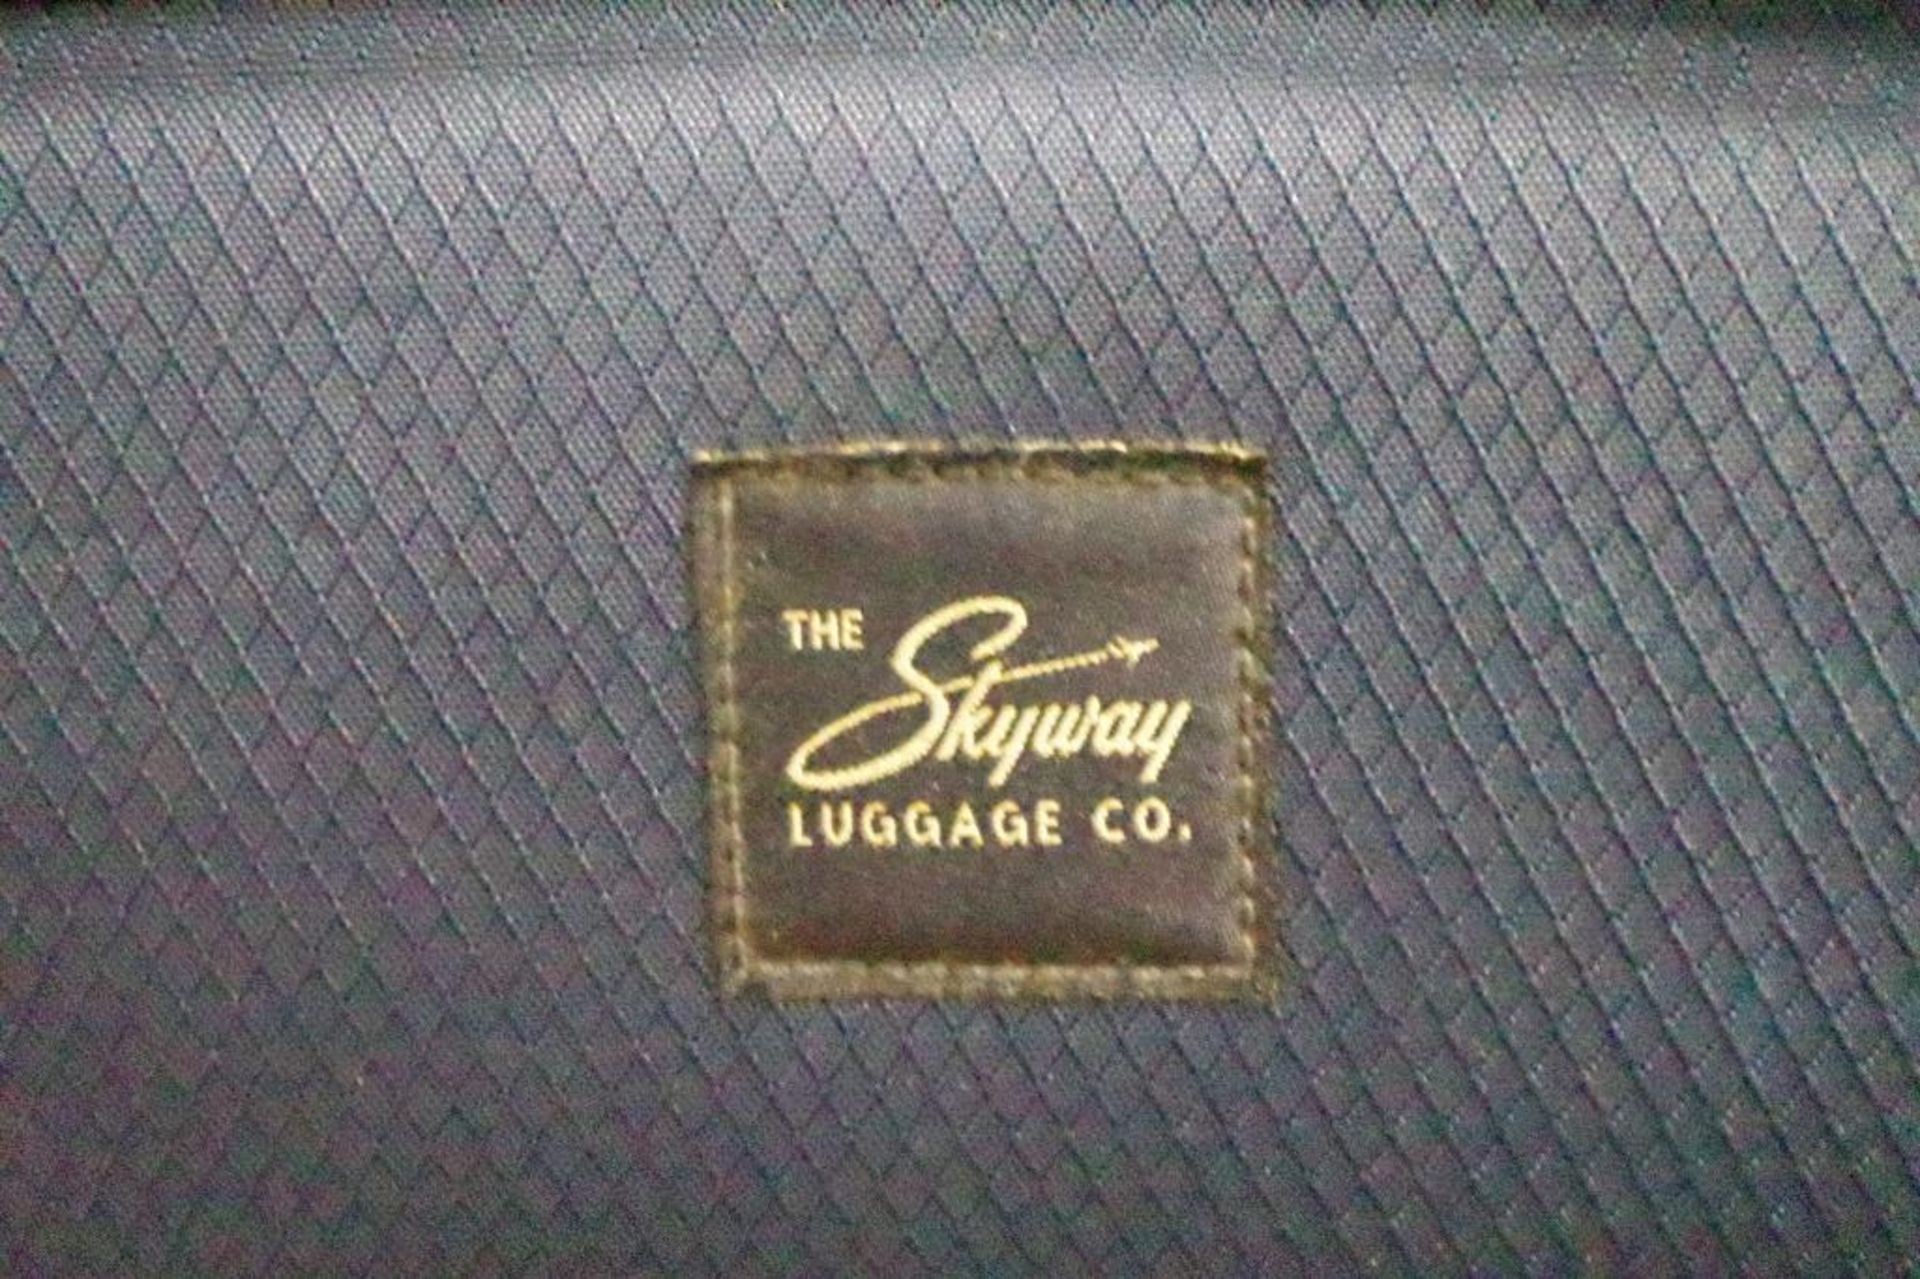 THE SKYWAY LUGGAGE CO. 2-Piece Luggage Set - Image 3 of 3